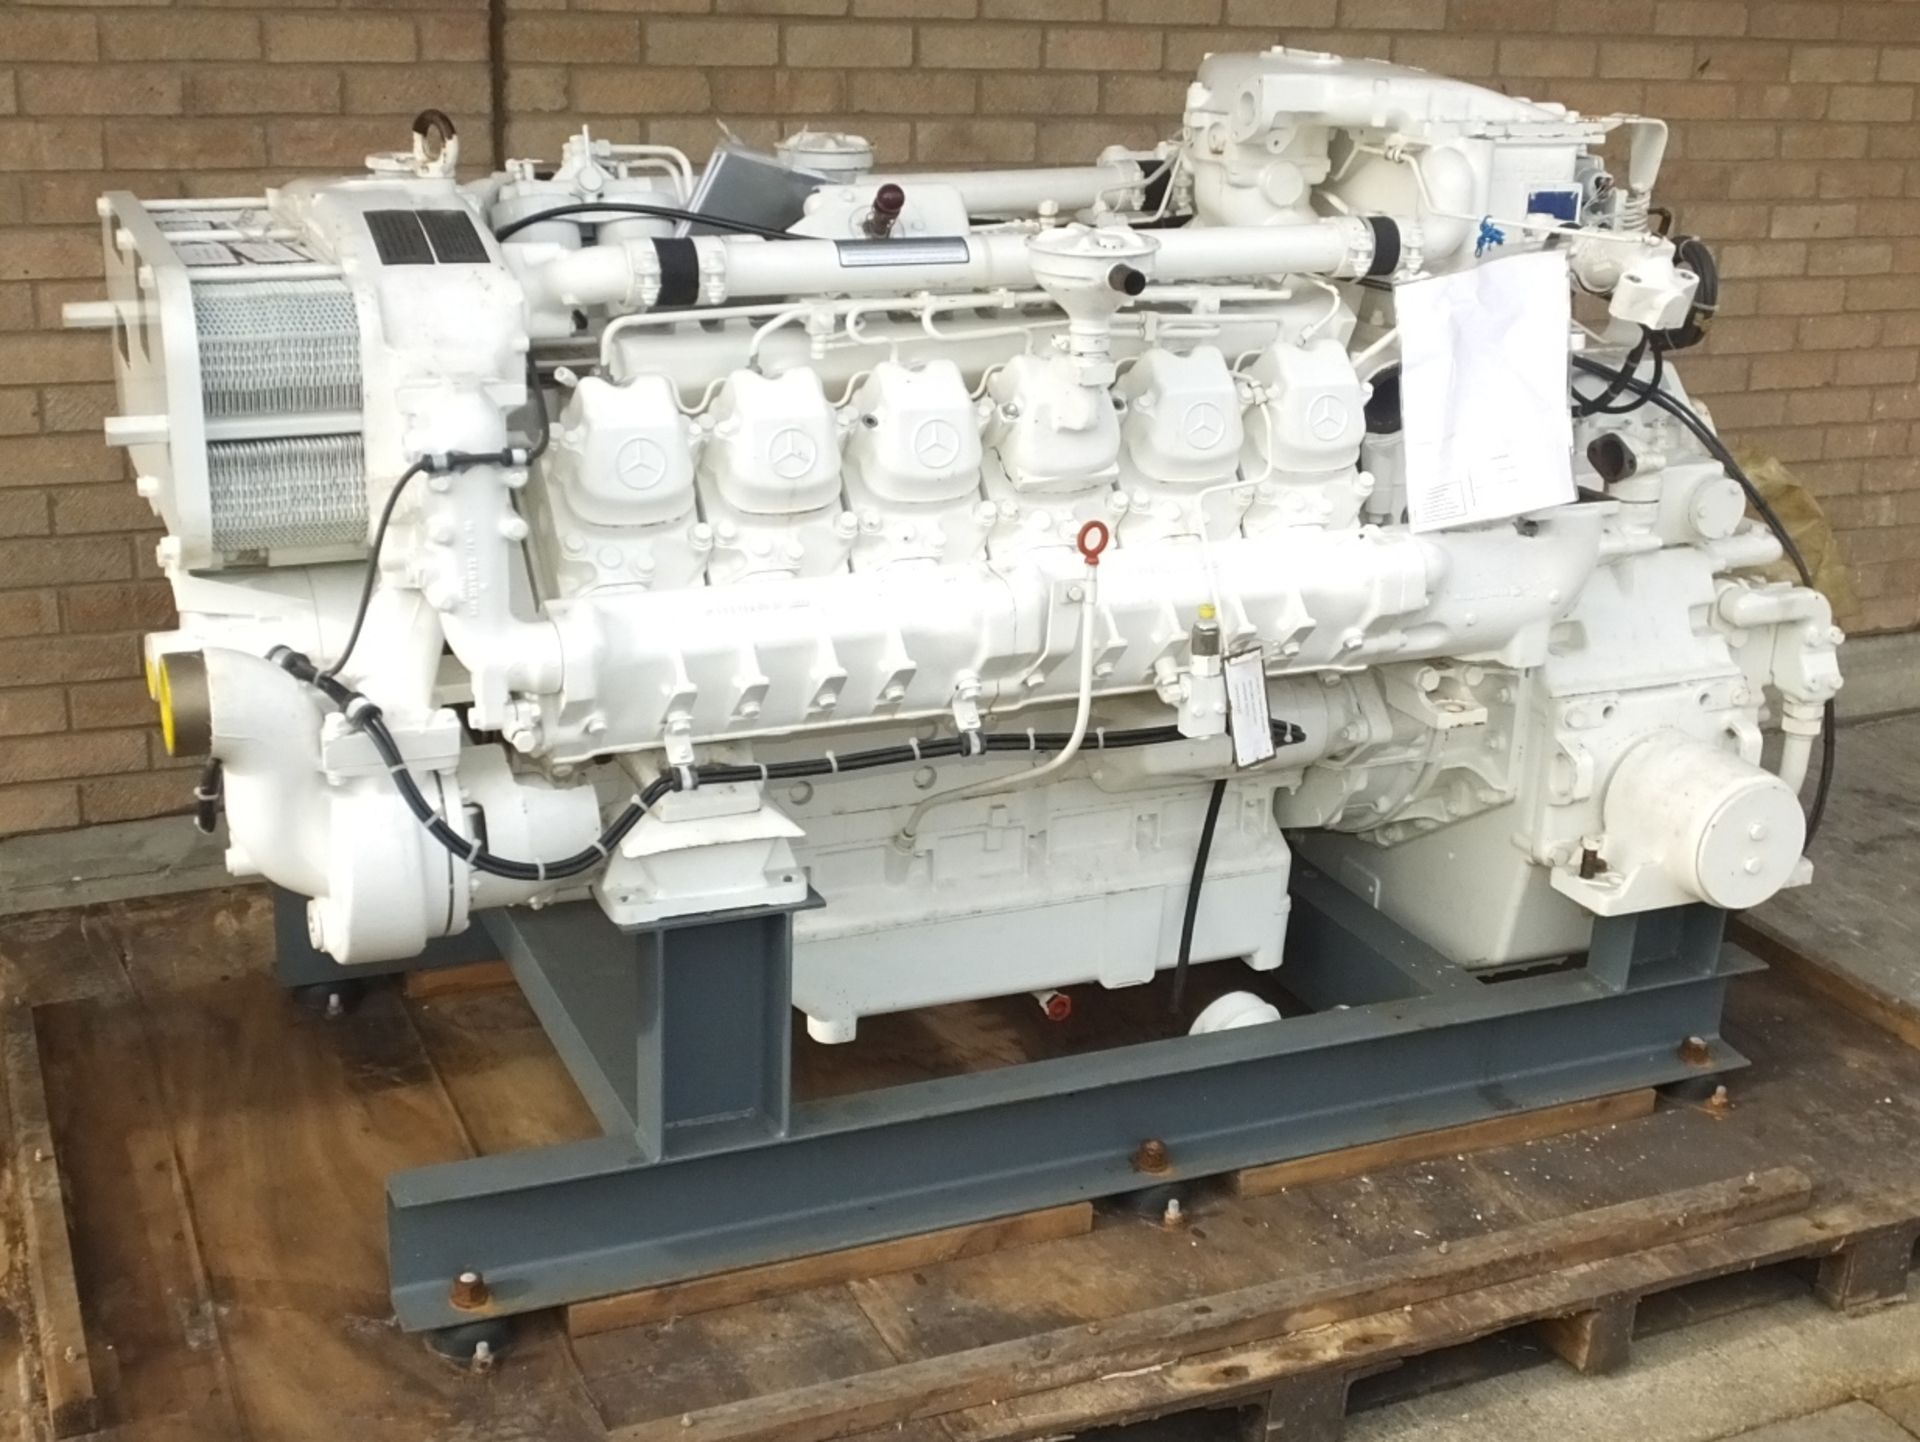 MTU 12V 183 engine - 610kW - 1310HP - 2100 RPM - looks to have only done test hours - very clean - Image 20 of 37